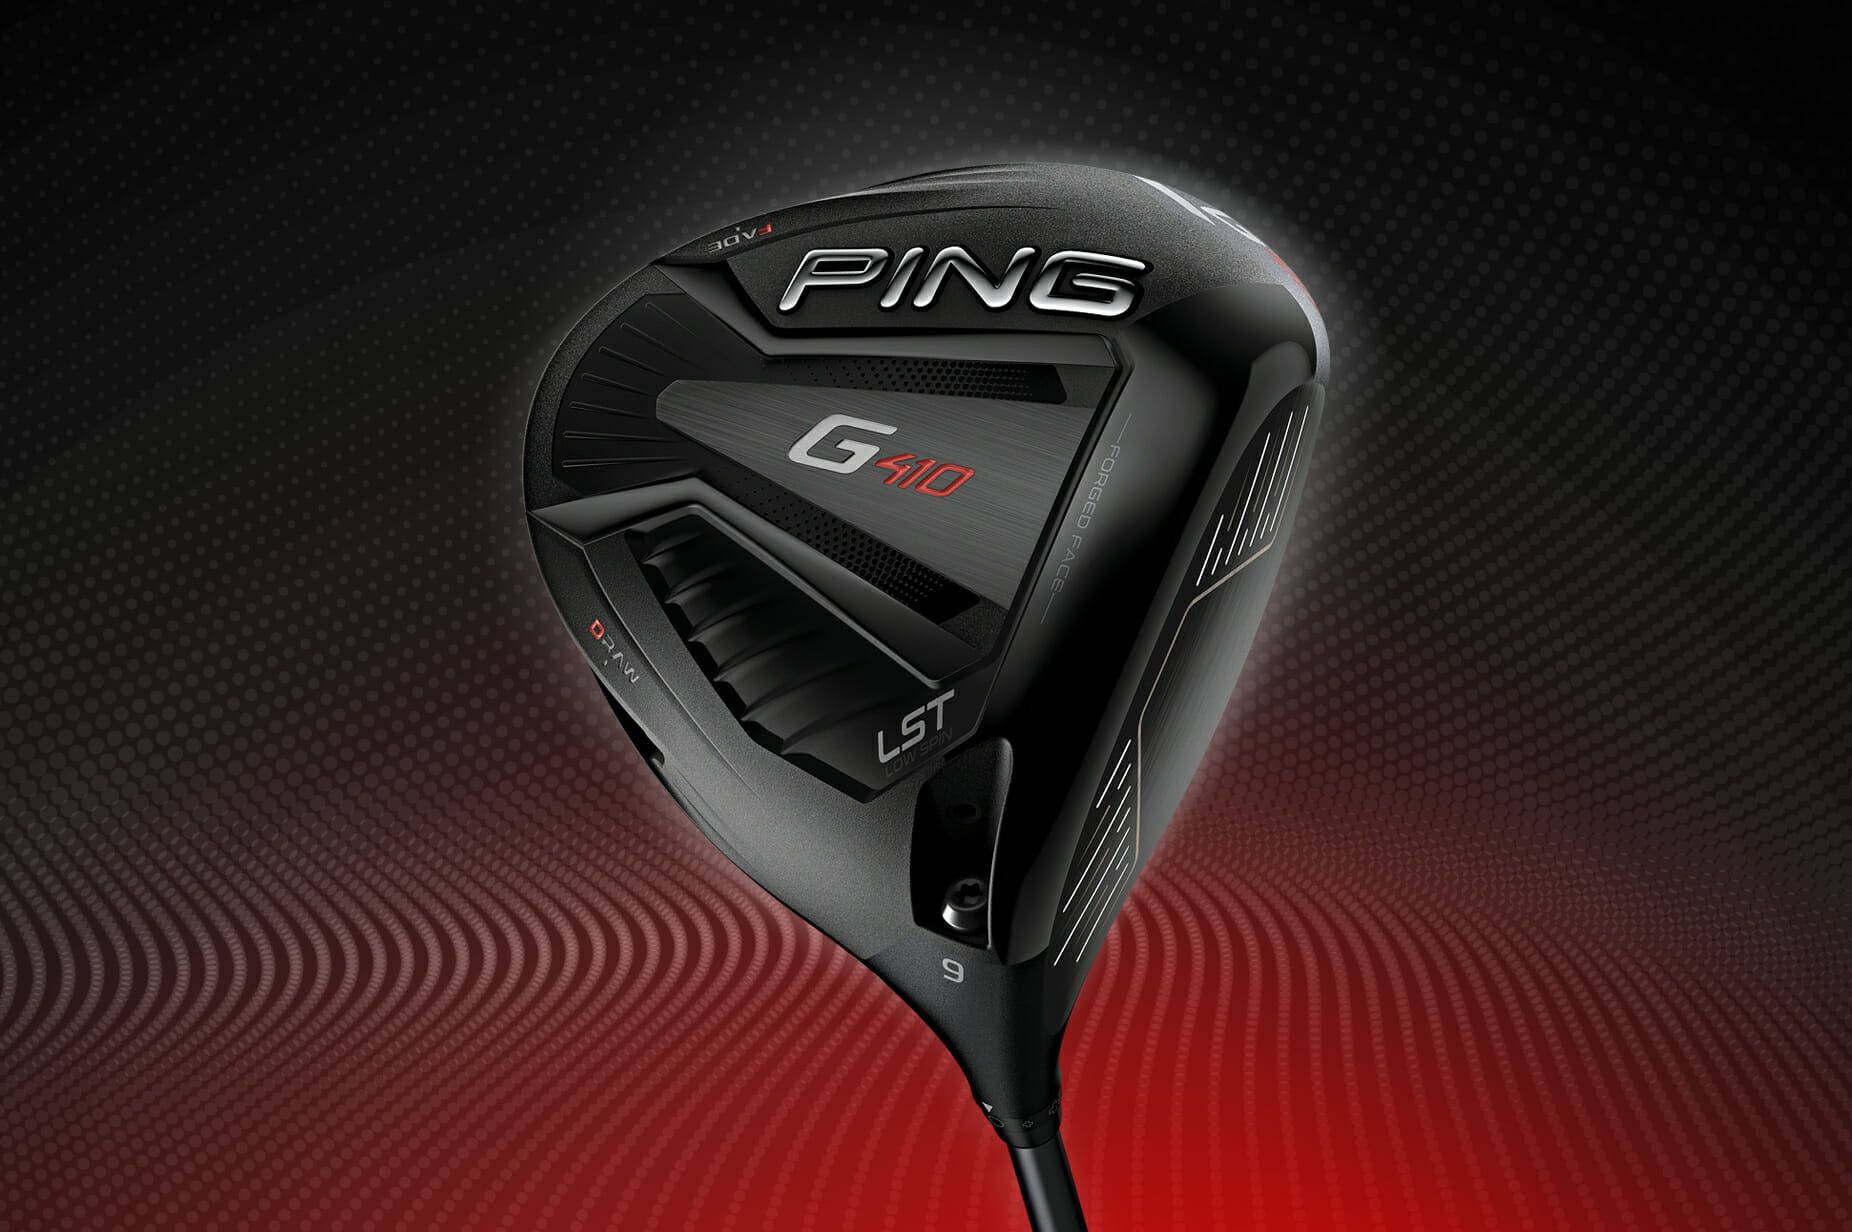 PING takes aim at all golfers with new G410 LST Driver